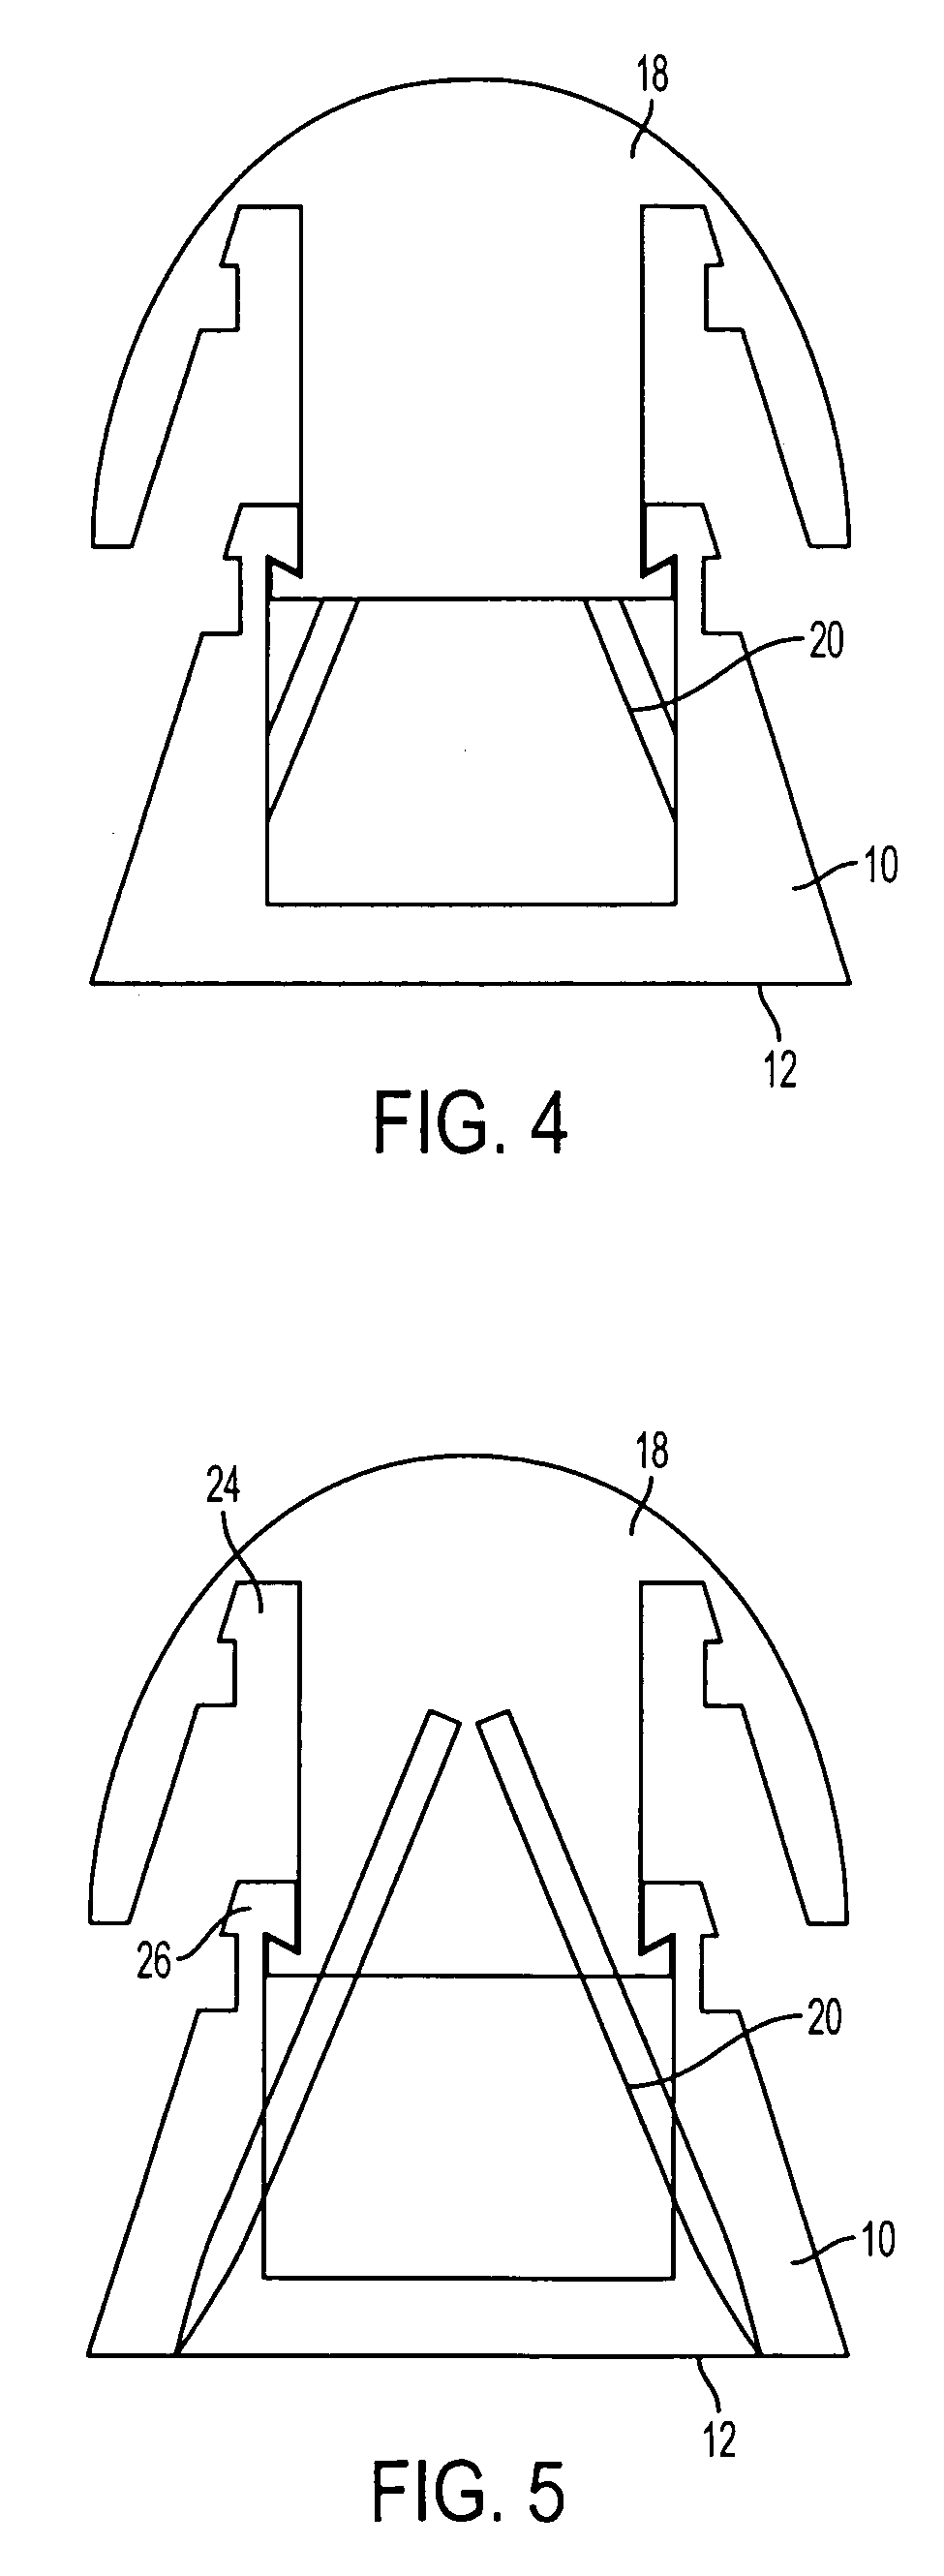 Device that attaches to a surface